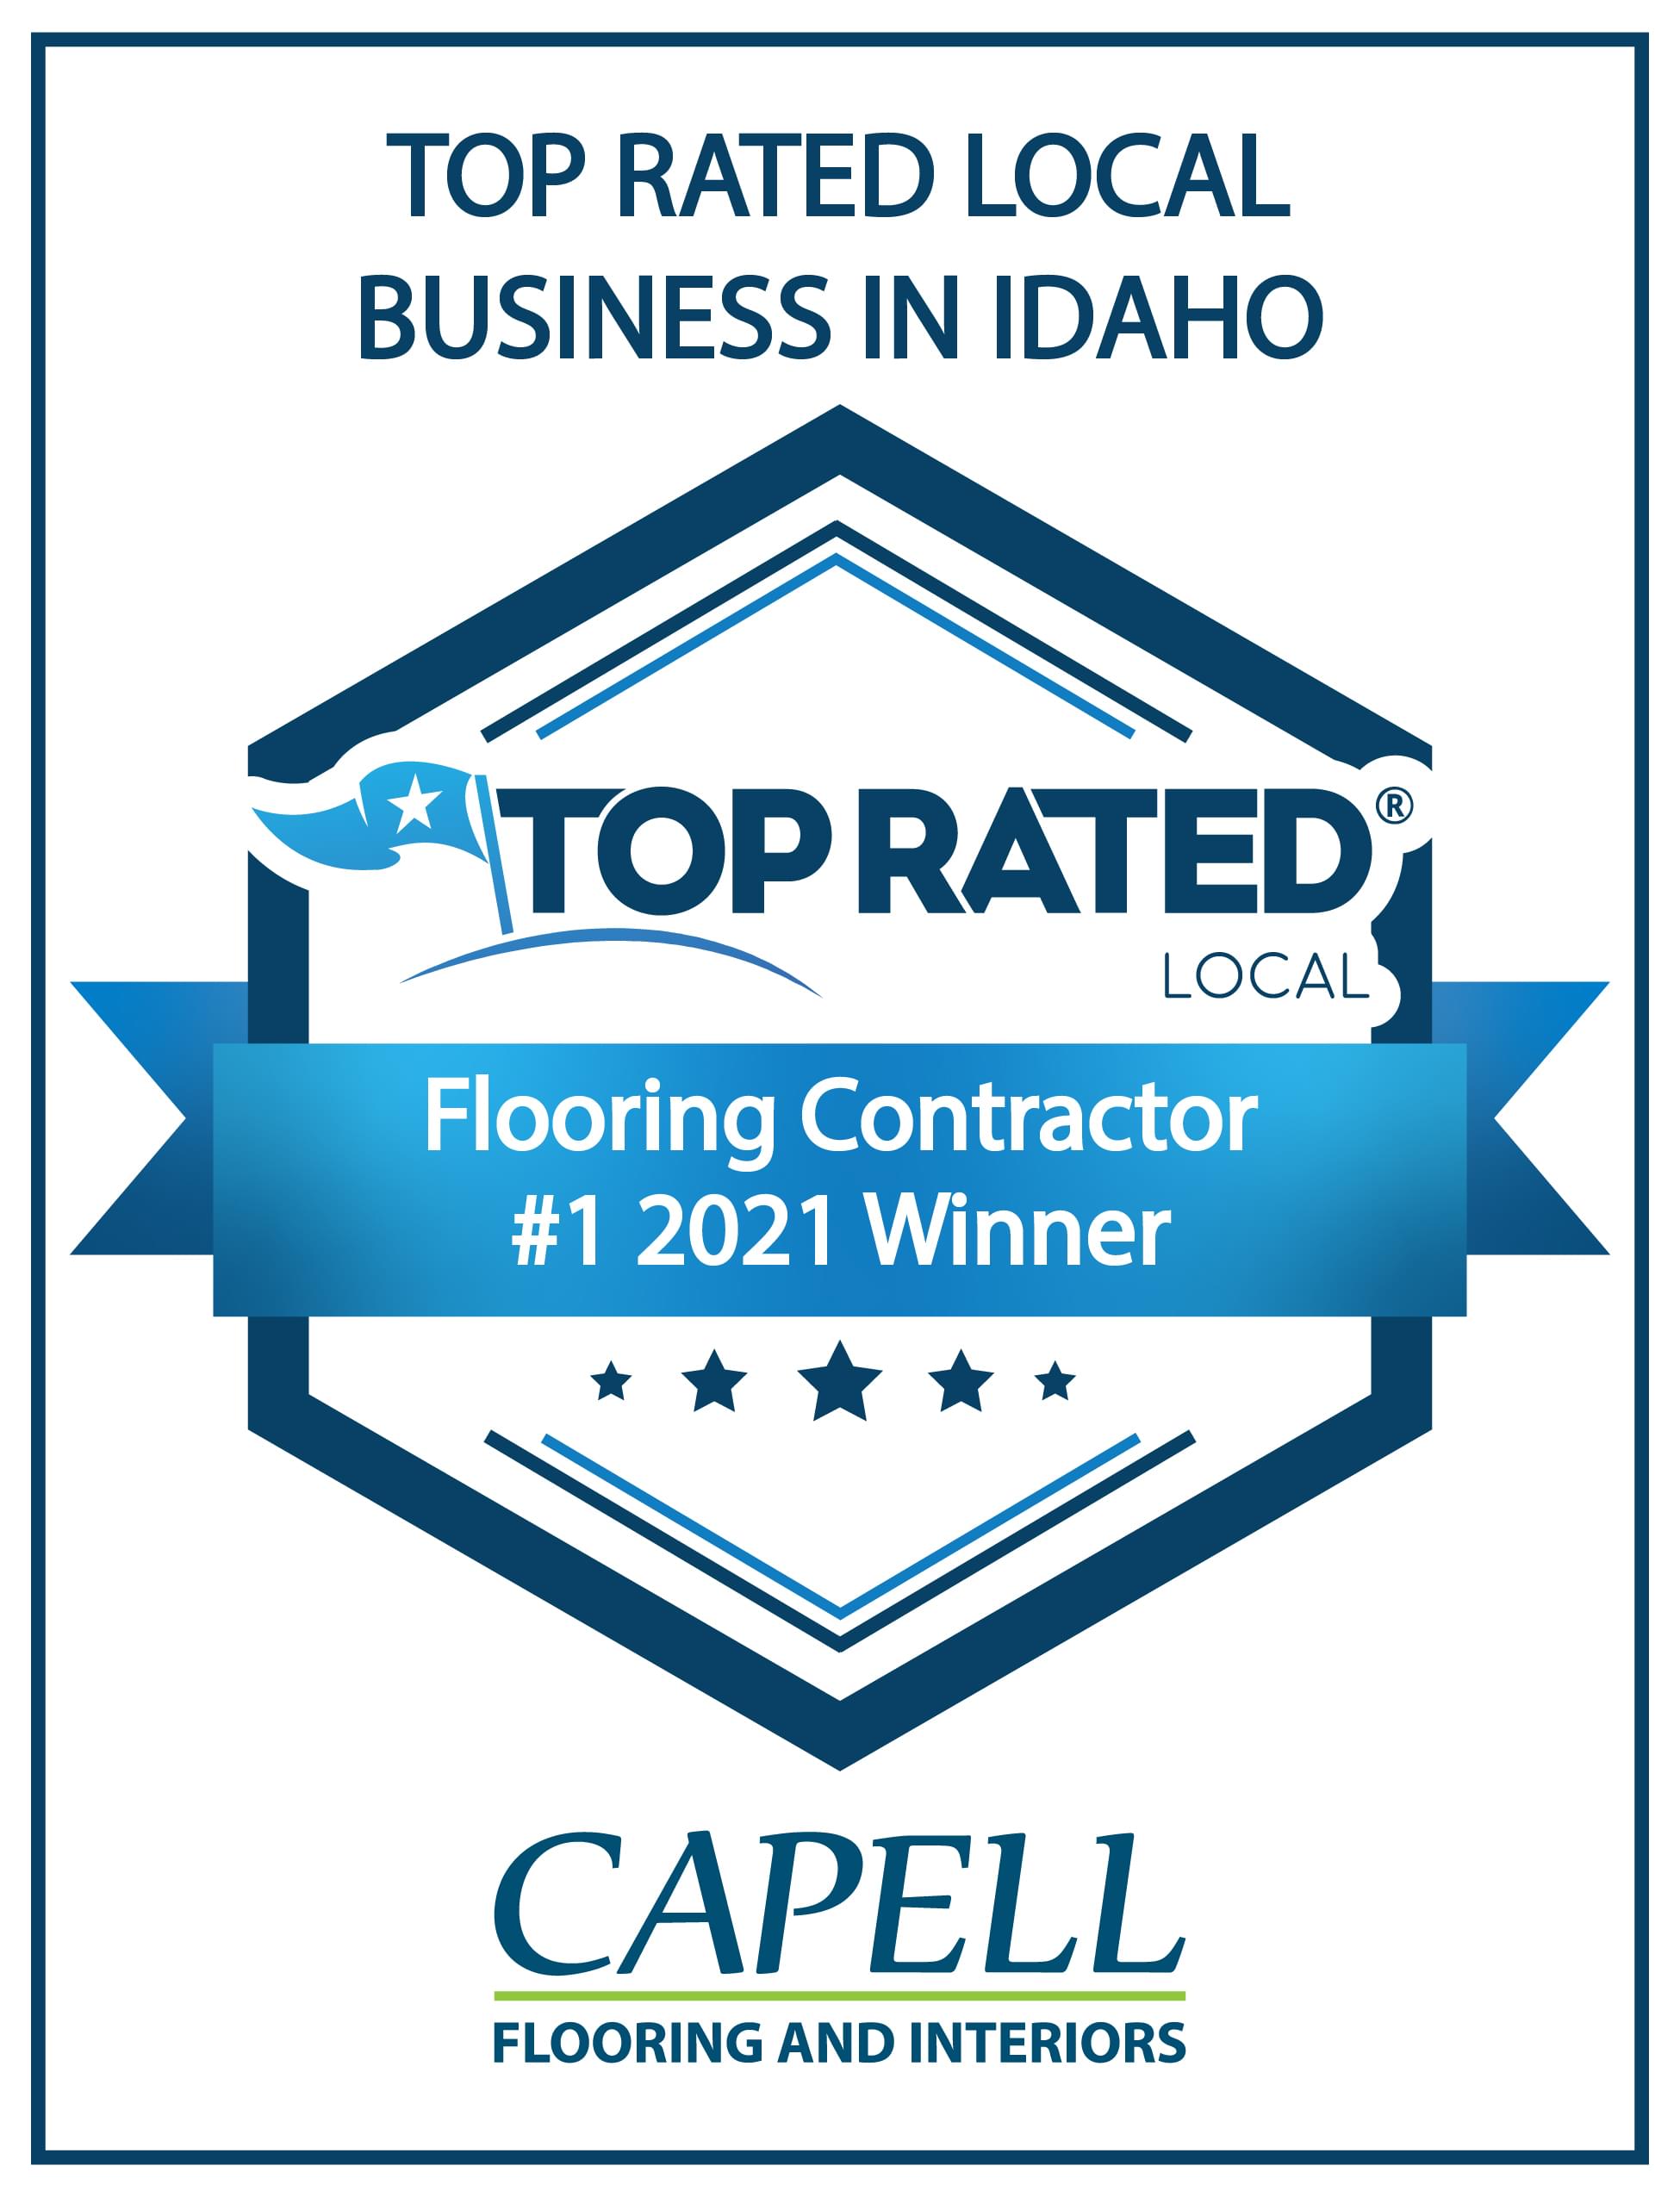 Capell Flooring Top Rated Contractor Boise Idaho, Capell Flooring and Interiors, Capell Flooring, Capell Interiors, Meridian Floors, Meridian Flooring, Meridian Idaho Hardwood, Meridian Idaho Carpet Store, Nampa Floors, Nampa Flooring, Caldwell Idaho Flooring, Kuna Idaho Flooring, Idaho’s Best Flooring Store, Eagle Idaho Flooring, Eagle Floors, Boise Floors, Boise Flooring, Boise Floor Store, Boise Carpet Store, Boise Idaho Hardwood, Boise Idaho Refinishing